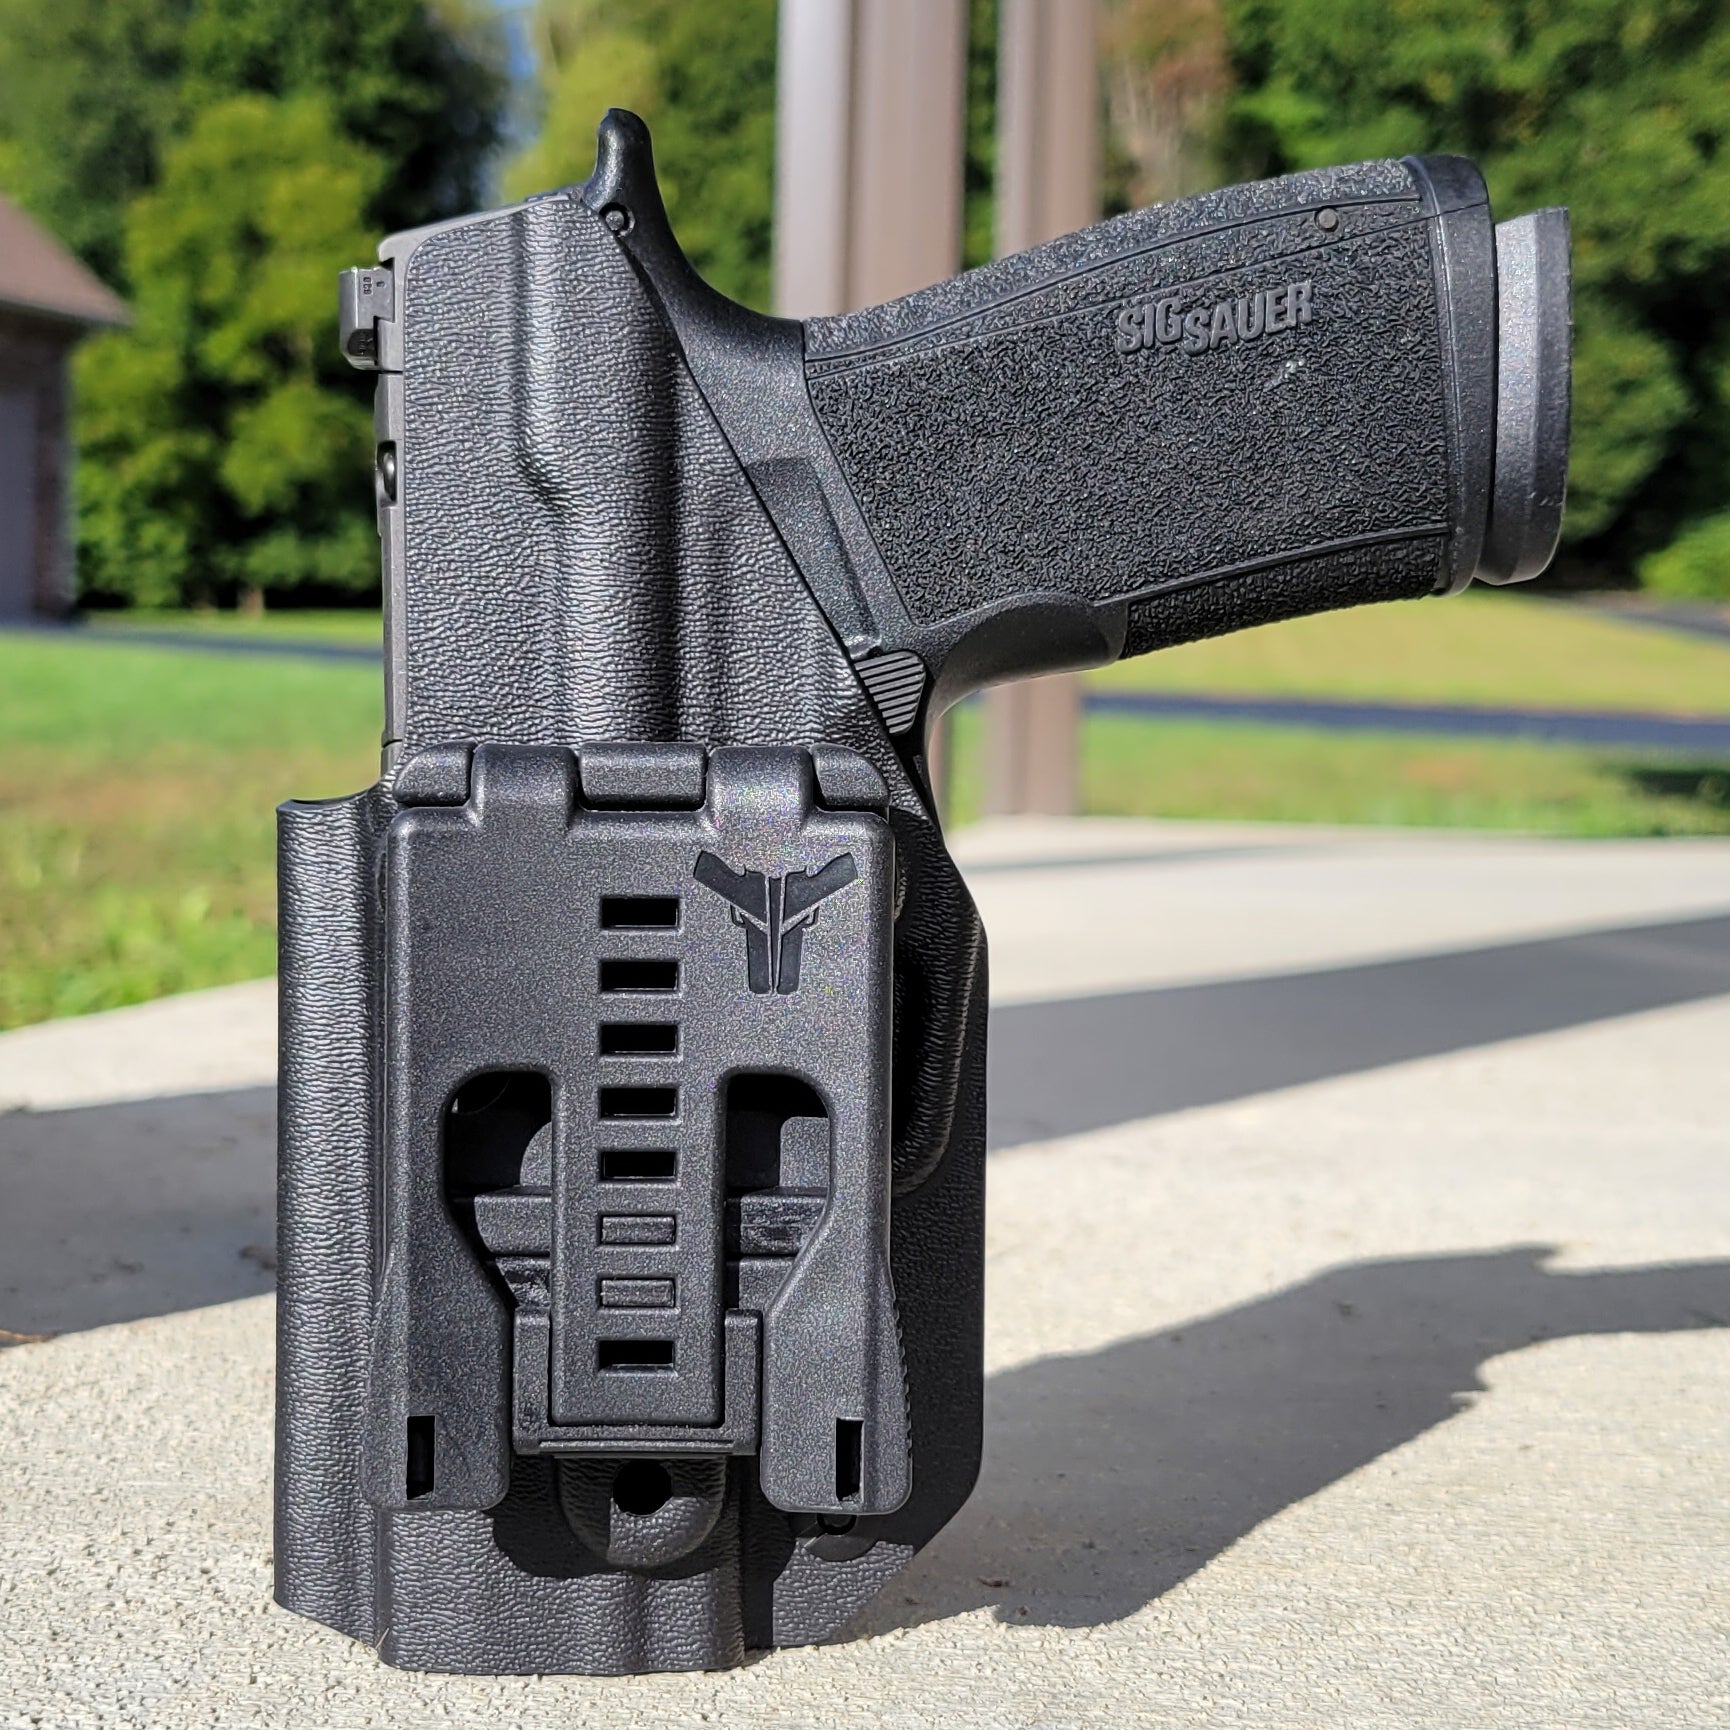 For the best, Outside Waistband OWB Kydex Holster designed to fit the Sig Sauer P365-XMACRO, P365-XMACRO COMP, P365-XMACRO TACOPS, and P365-XMACRO COMP ROMEOZERO ELITE handgun, shop Four Brothers Holsters.  Full sweat guard, adjustable retention. Made in USA Open muzzle for threaded barrels, cleared for red dot sights.